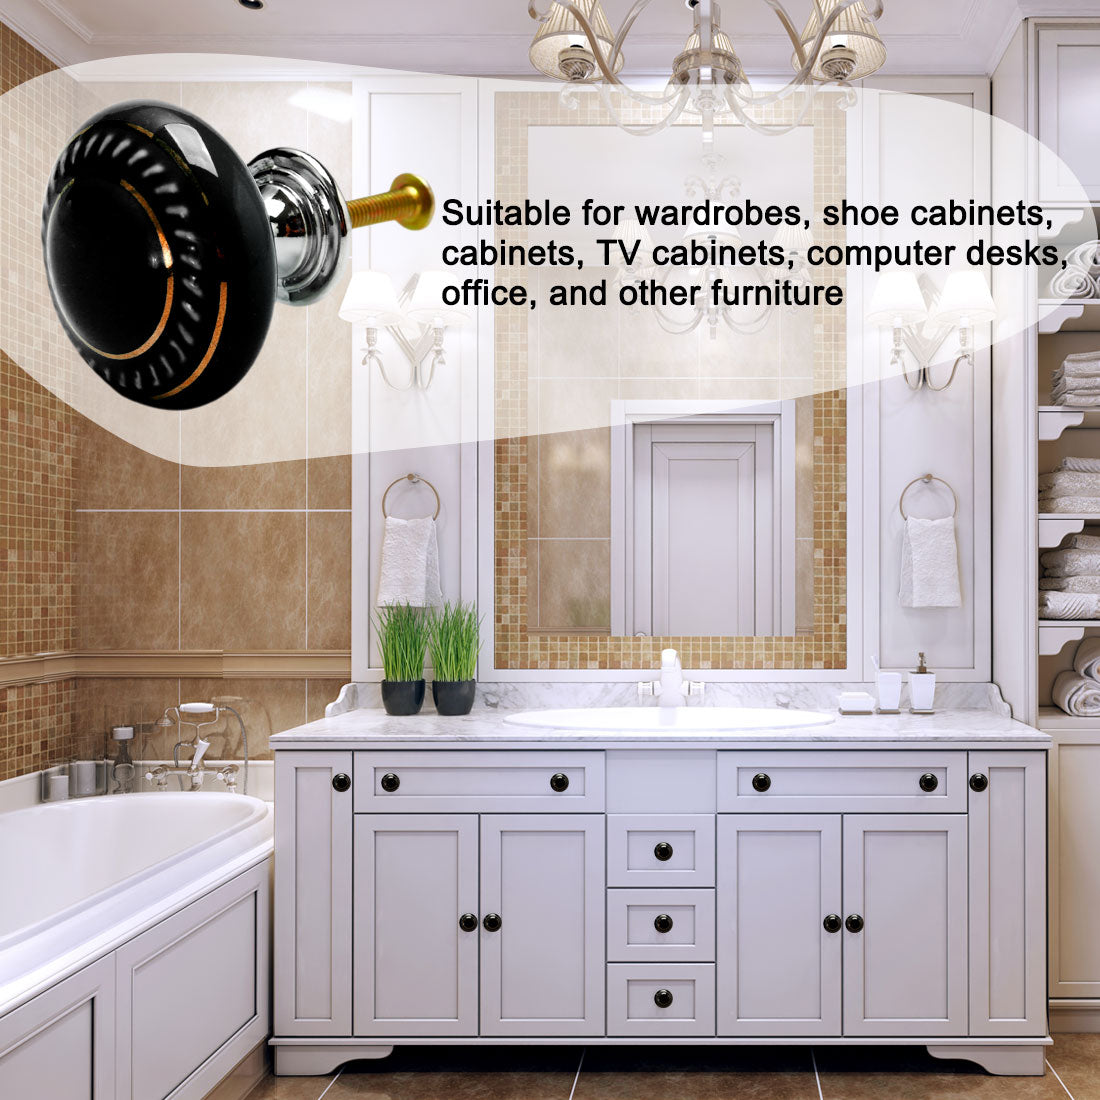 uxcell Uxcell Ceramic Vintage Knobs Drawer Pull Handle Cupboard Dresser 6pcs Gold Circle Black